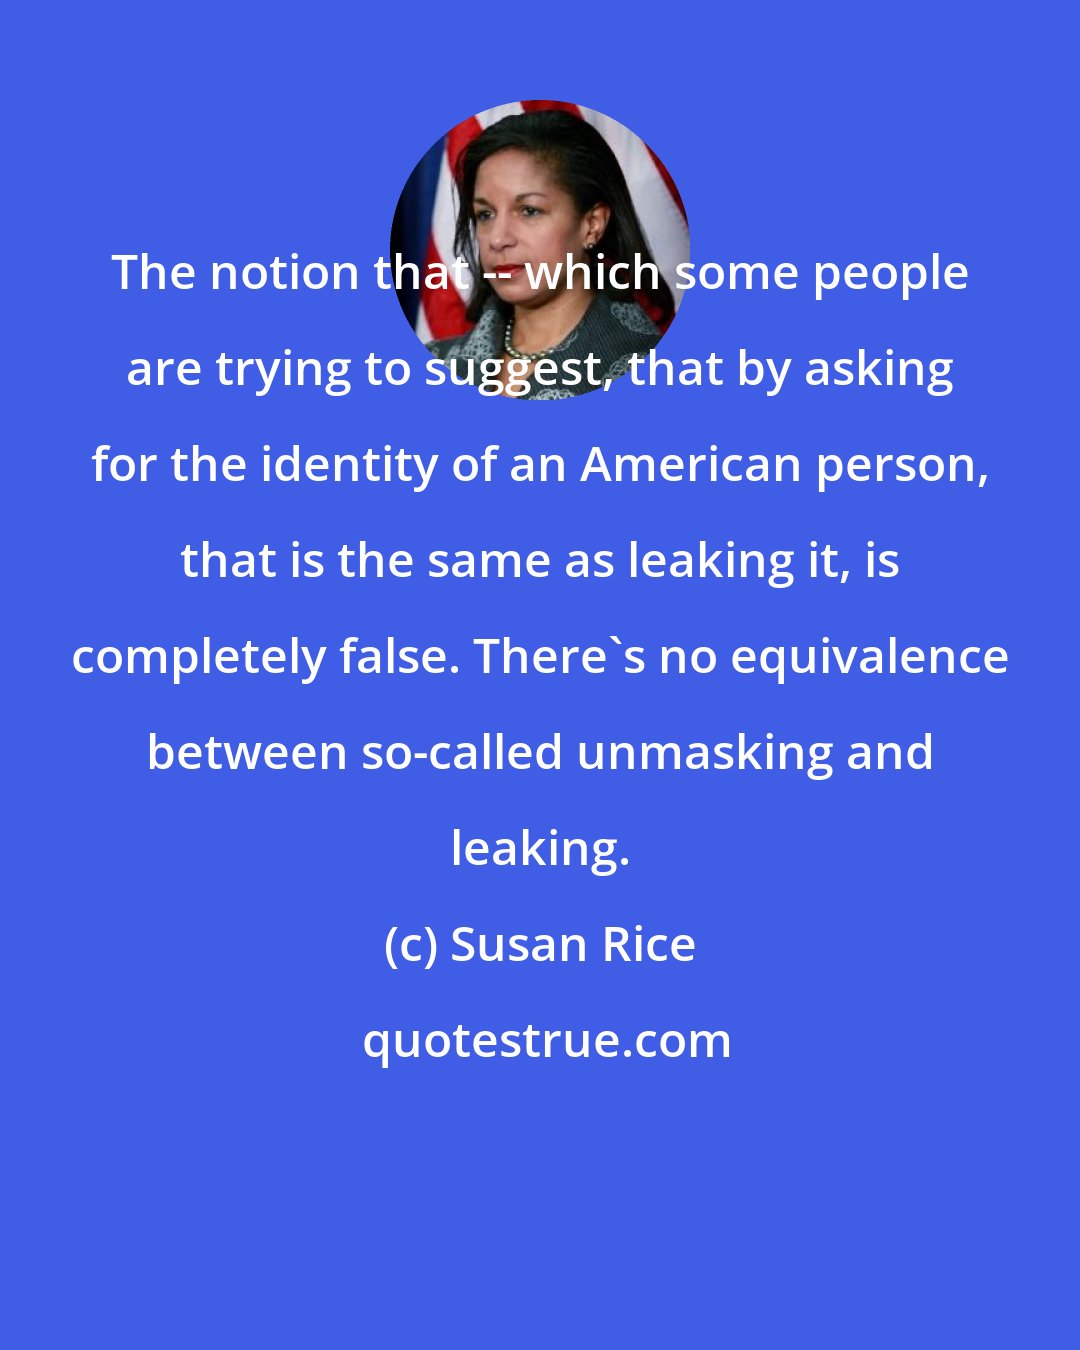 Susan Rice: The notion that -- which some people are trying to suggest, that by asking for the identity of an American person, that is the same as leaking it, is completely false. There's no equivalence between so-called unmasking and leaking.